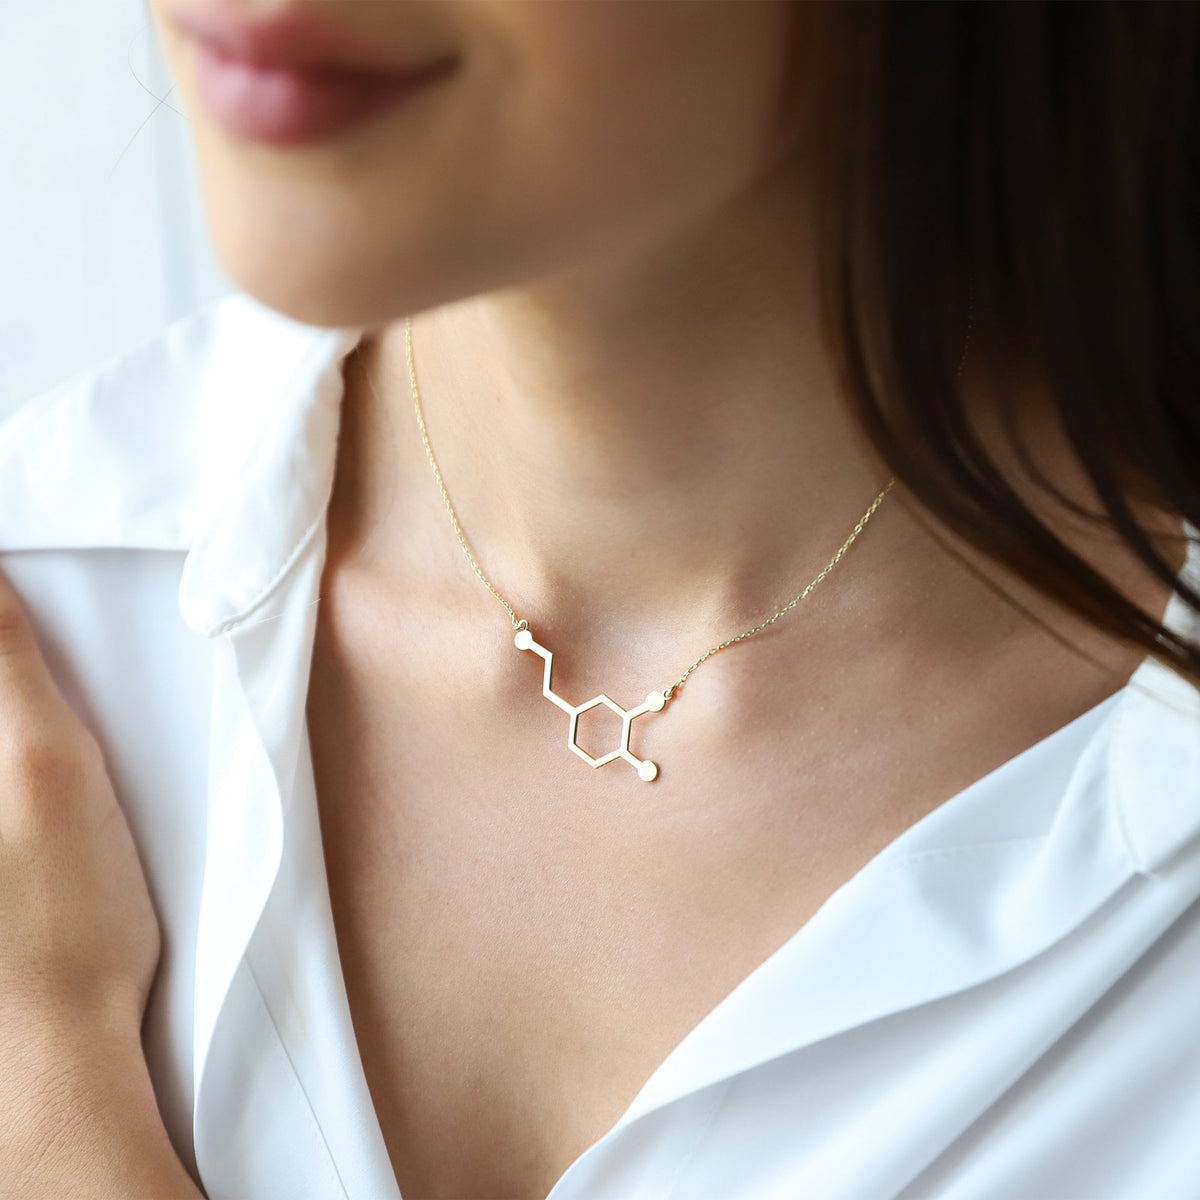 Dopamine Molecule Necklace • Happiness Jewelry • 925 Sterling Silver Necklace • Dopamine Symbol Necklace • Chemistry Gift • Science Jewelry